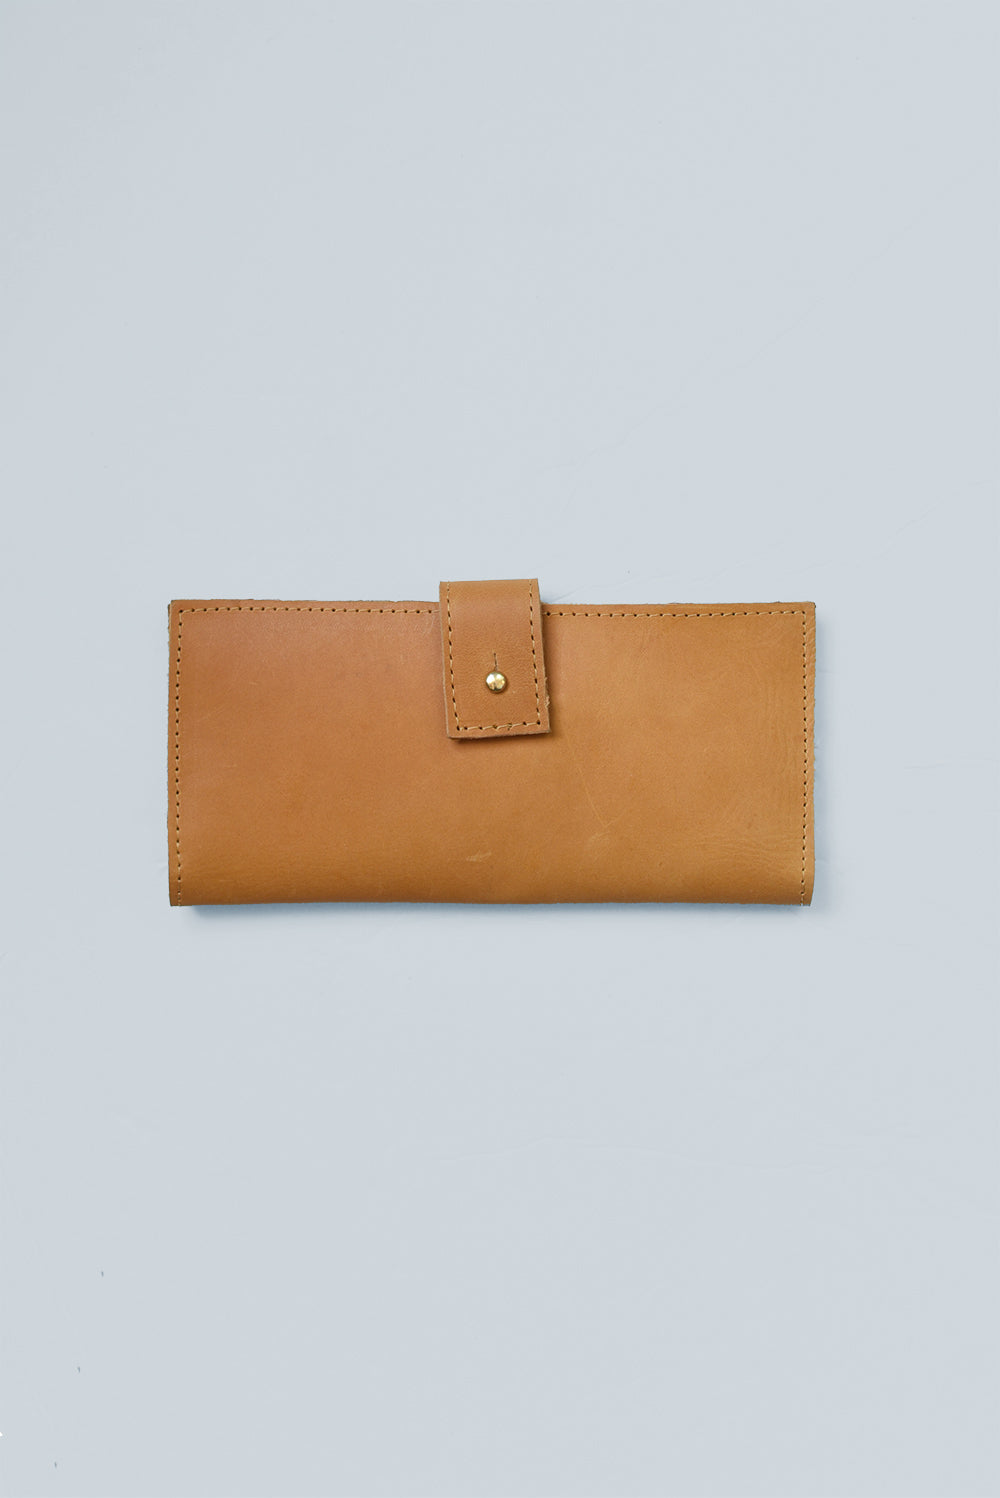 ethical handmade leather wallets